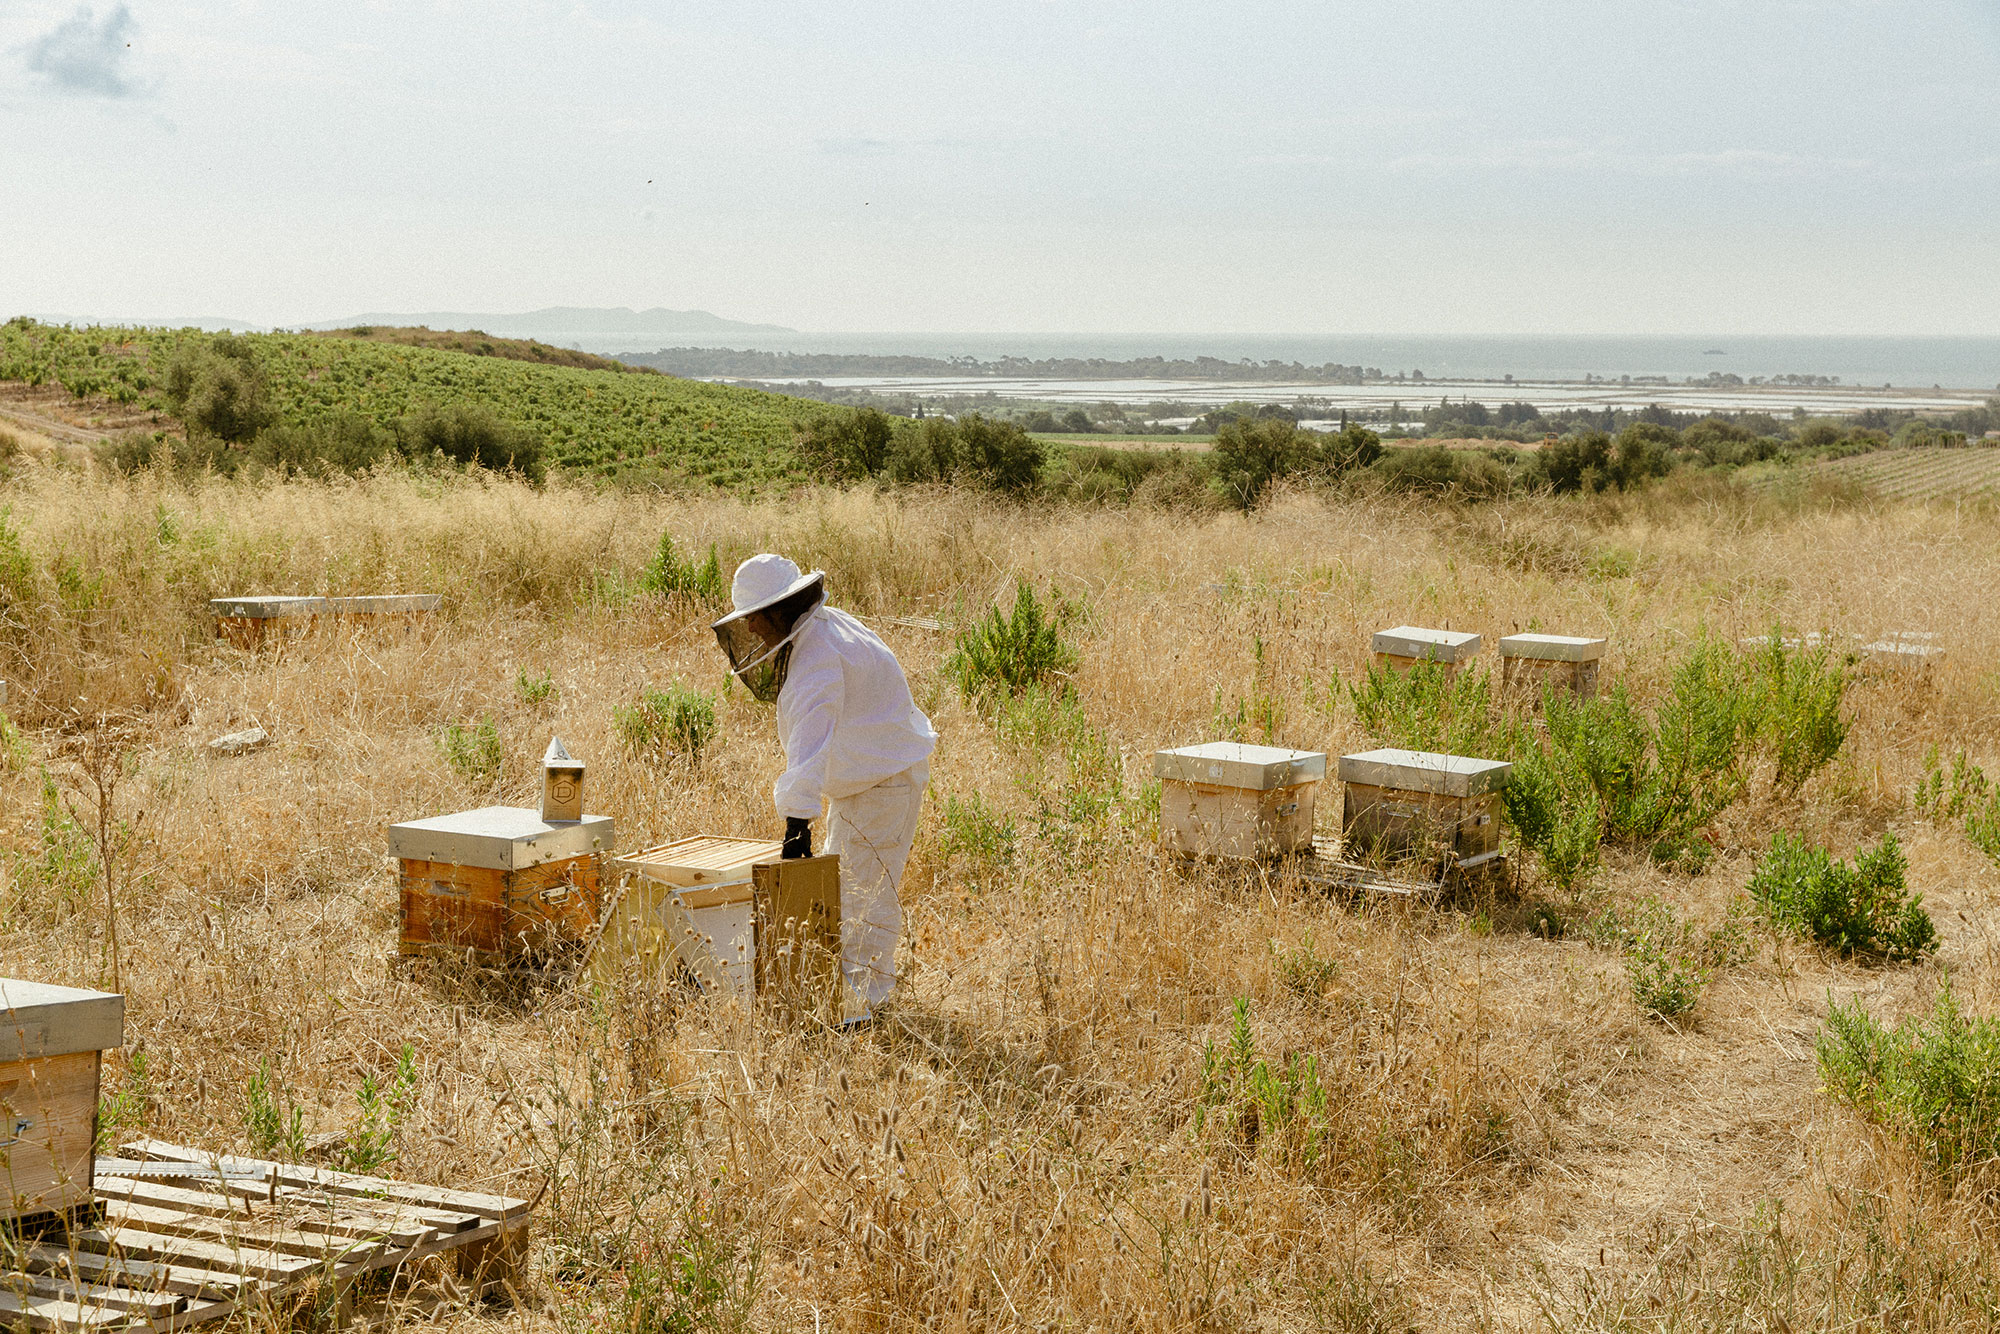 Within Château Galoupet's estate the Observatoire Francais d’Apidologie have installed 200 beehives